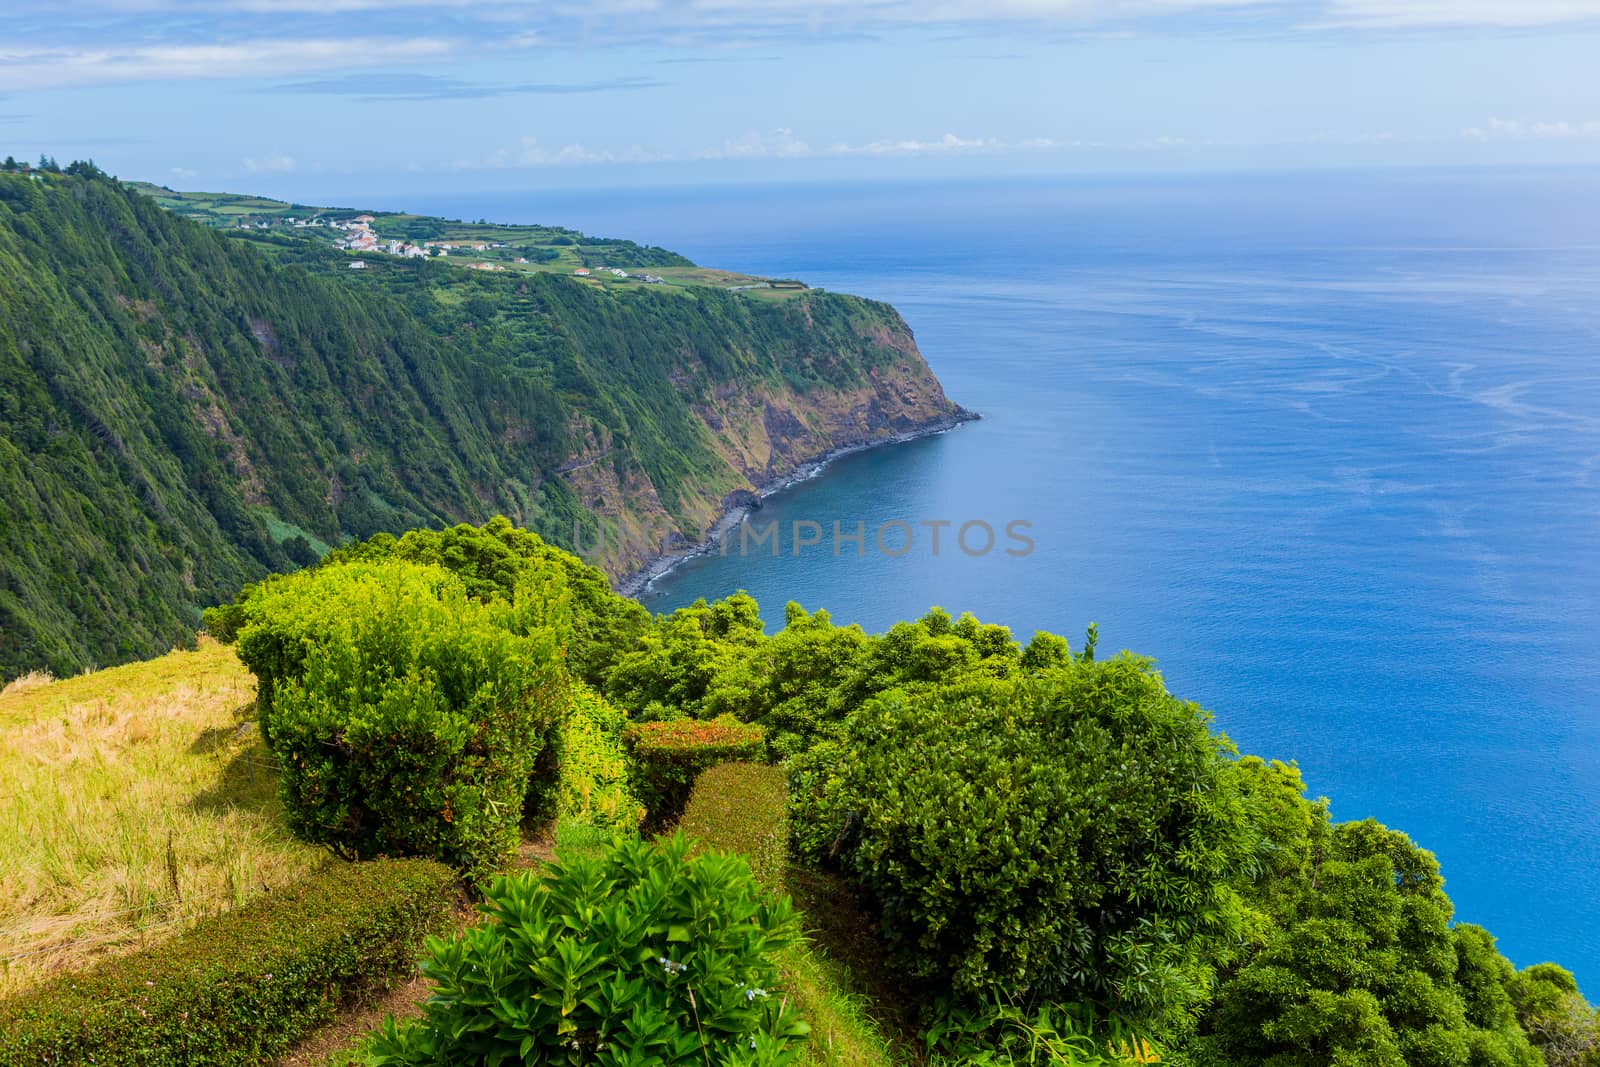 Northeast of the island of Sao Miguel in the Azores. Viewpoint of Ponta do Sossego. Amazingly point of interest in a major holiday destination of Portugal.